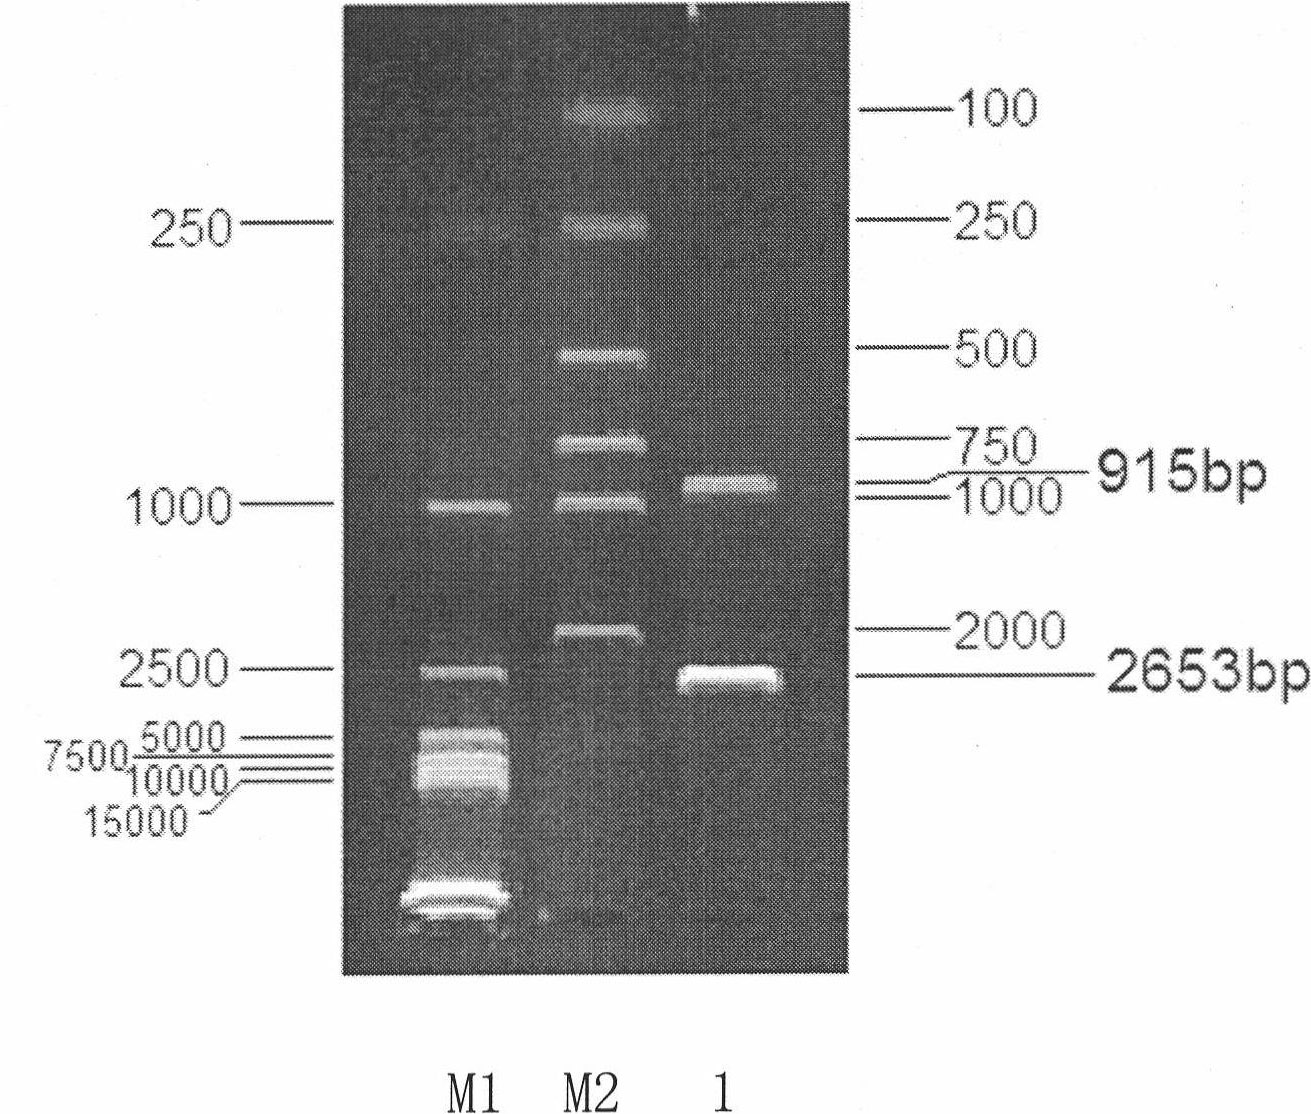 Amphiploid histidine auxotroph saccharomyces cerevisiae and constructing method thereof